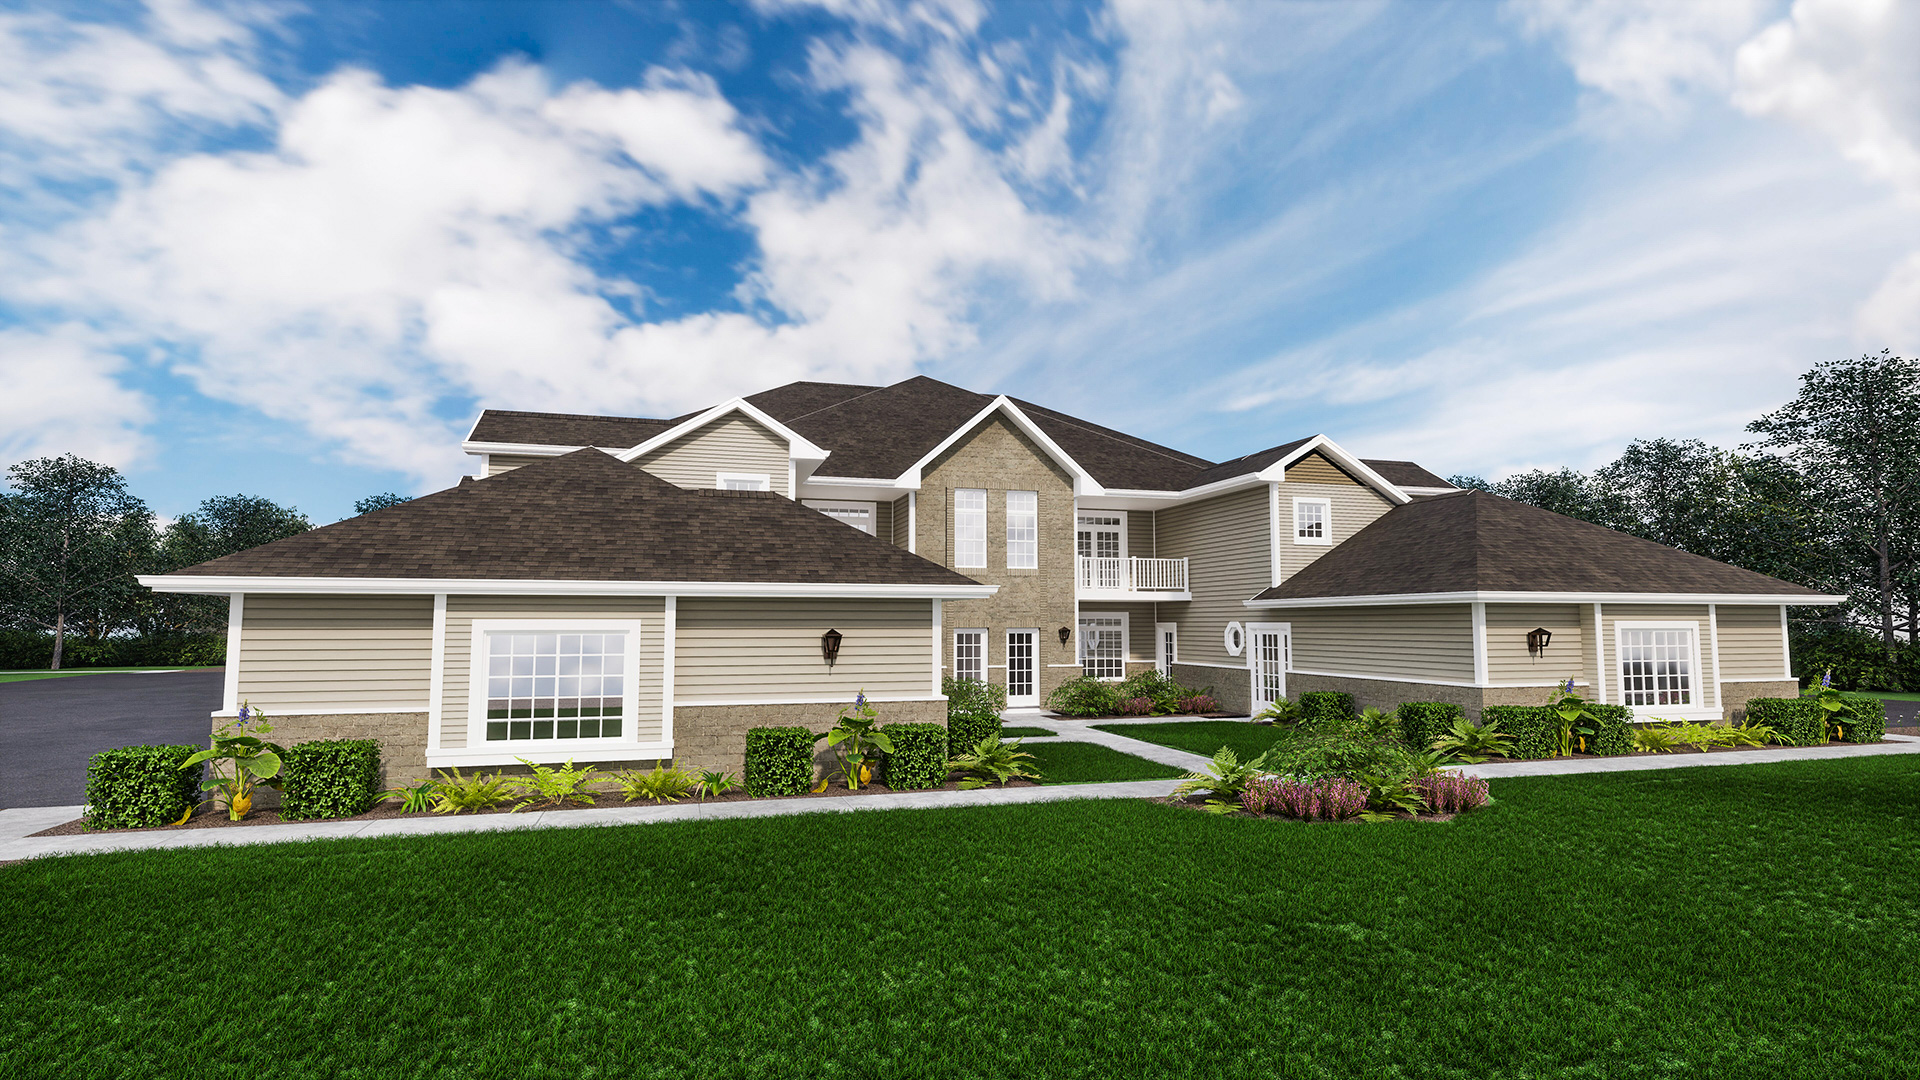 Edgewood Meadows Condo Rendering Stepping Stone Homes